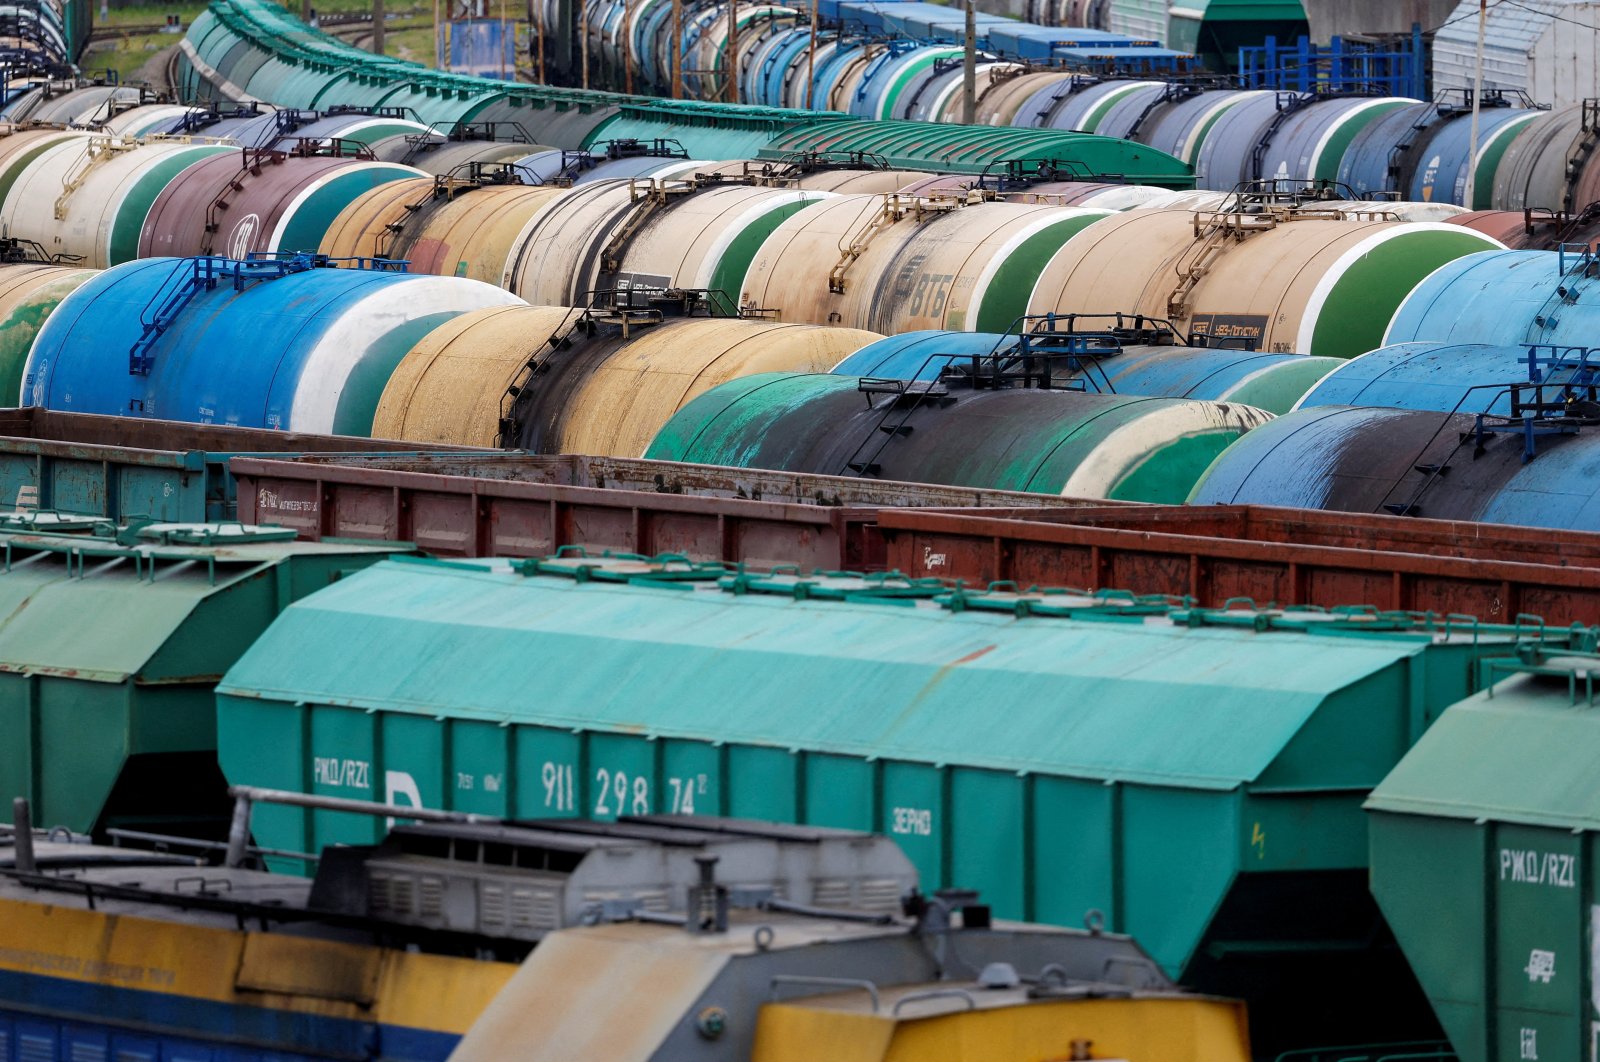 Rail freight cars are shown in Kaliningrad following a ban on the transit of some goods to the Russian Baltic coast exclave via Lithuanian territory under EU sanctions, June 21, 2022. (Reuters Photo)